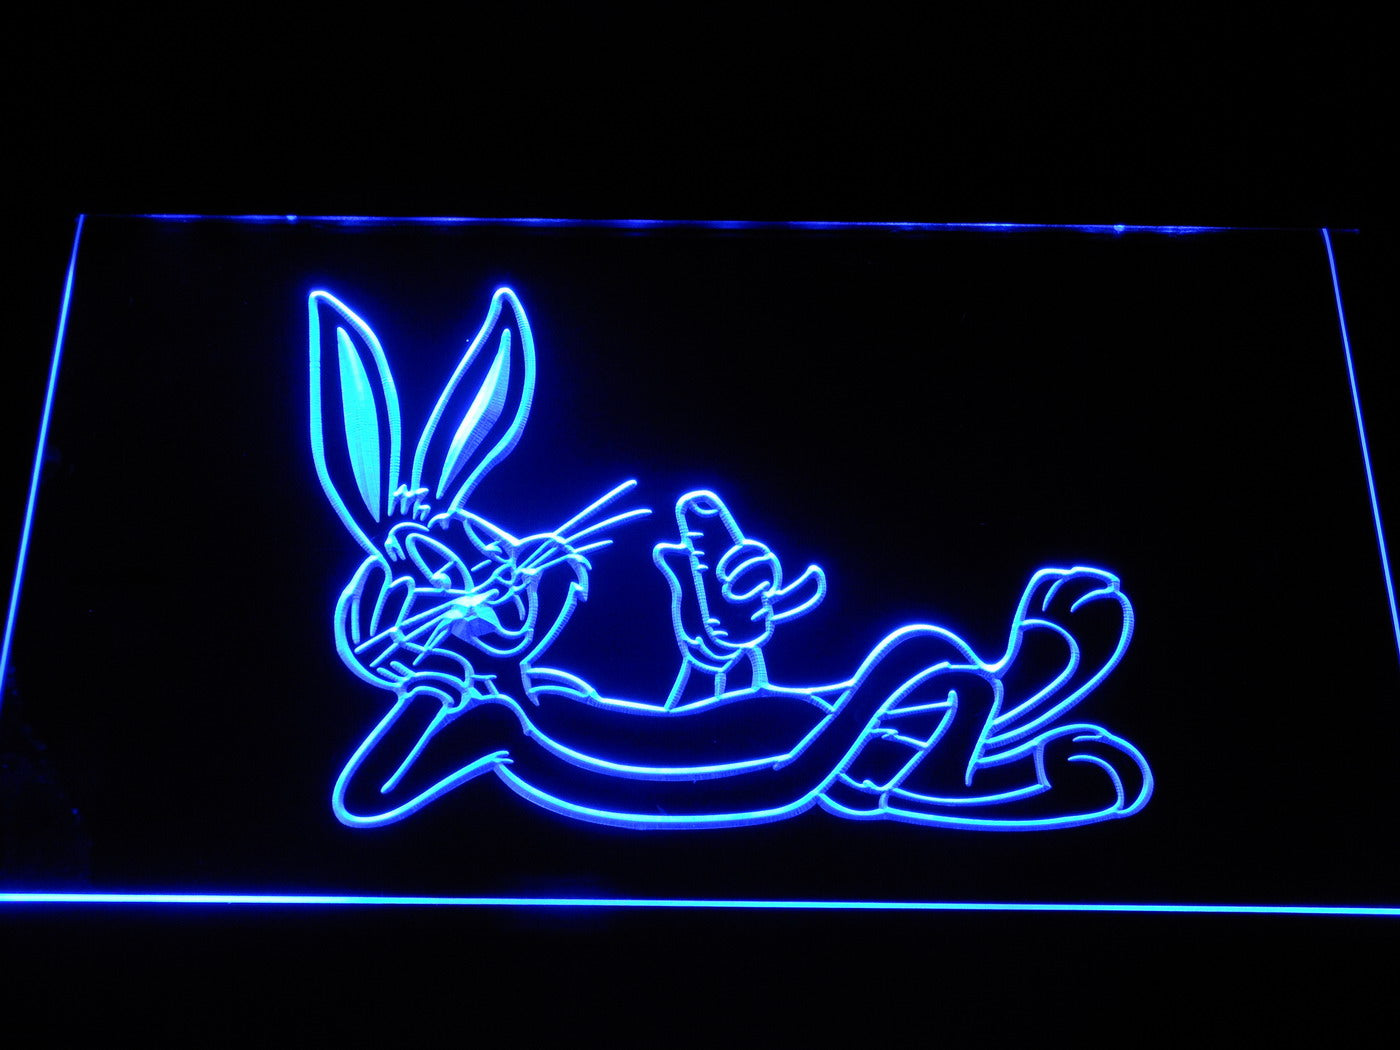 Bugs Bunny Lounging Neon Light LED Sign